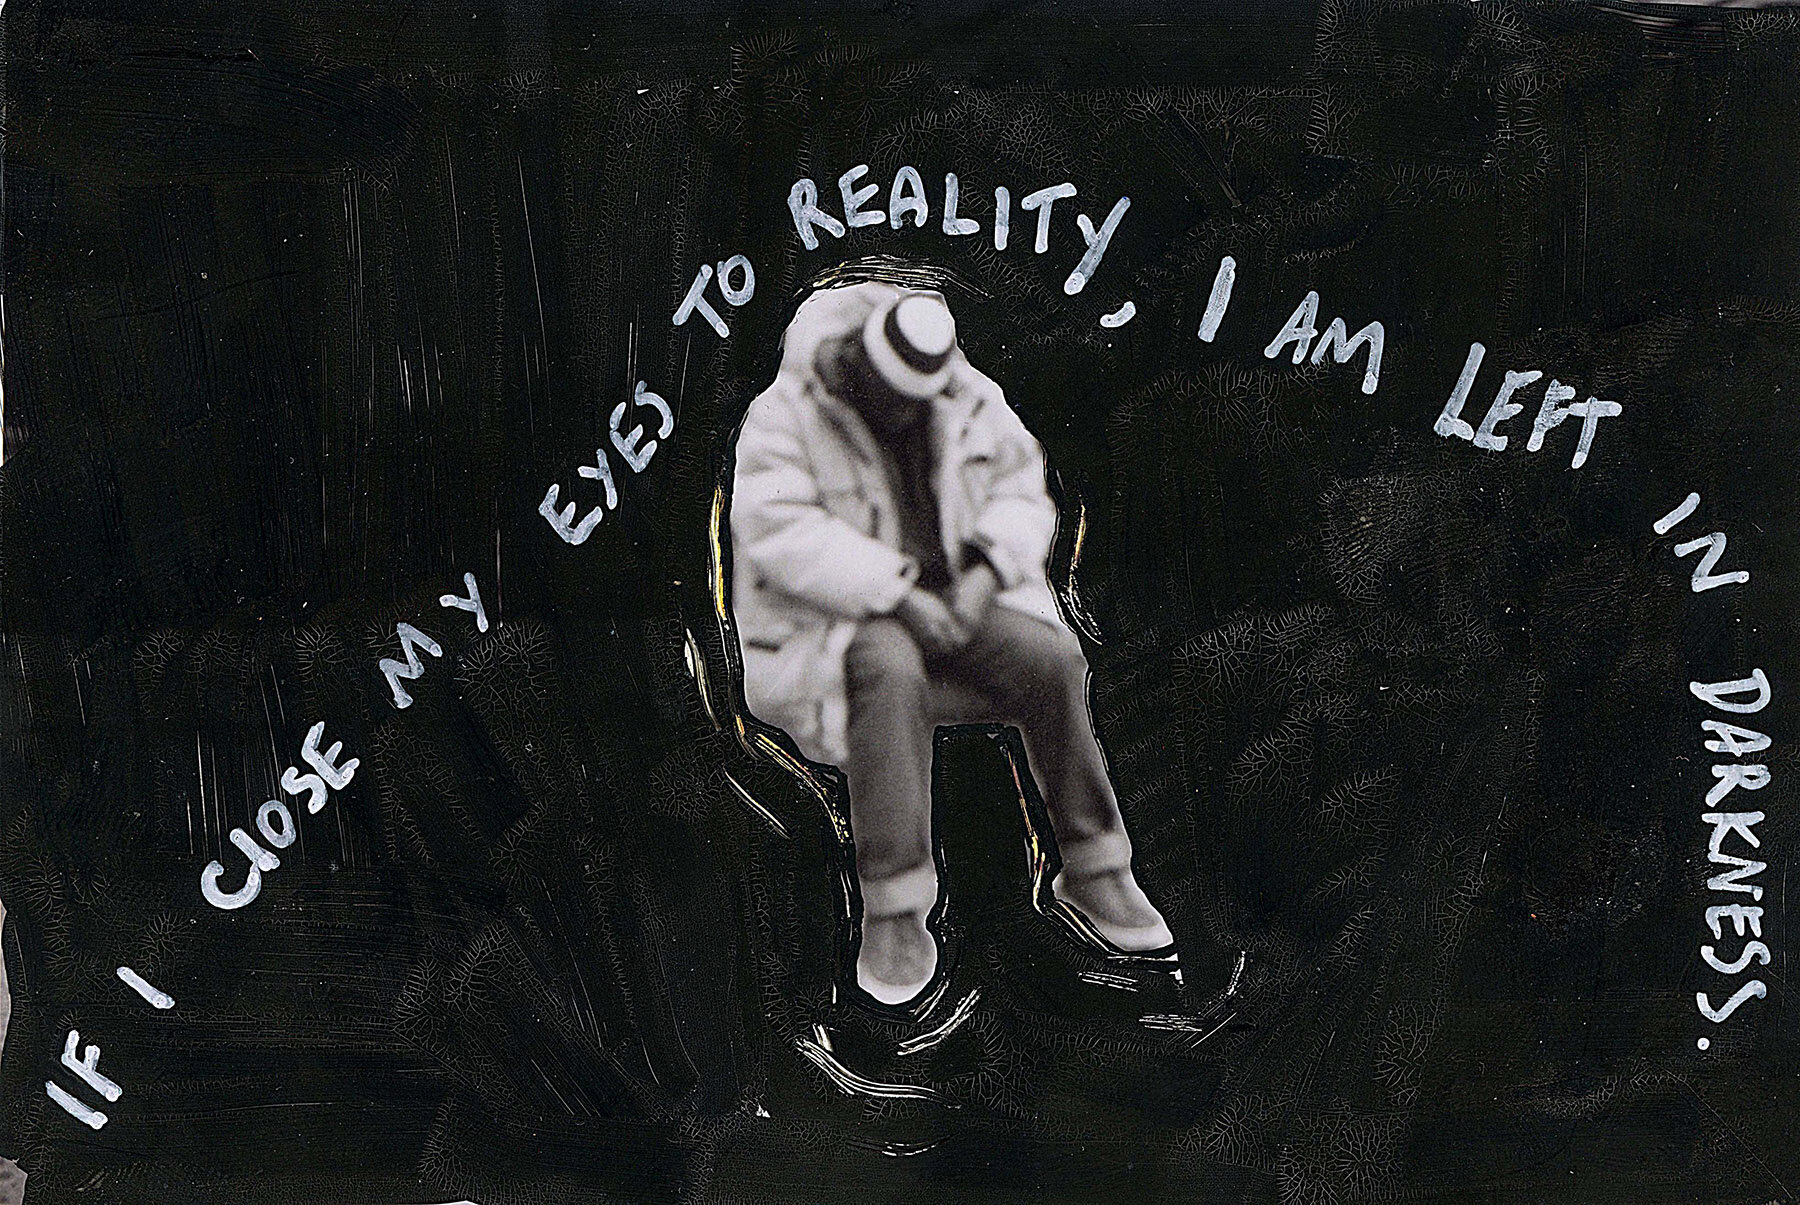  ‘If I close my eyes to Reality, I am left in Darkness’ 2015, Berlin, Inkjet photograph &amp; Acrylic, 10x15cm 